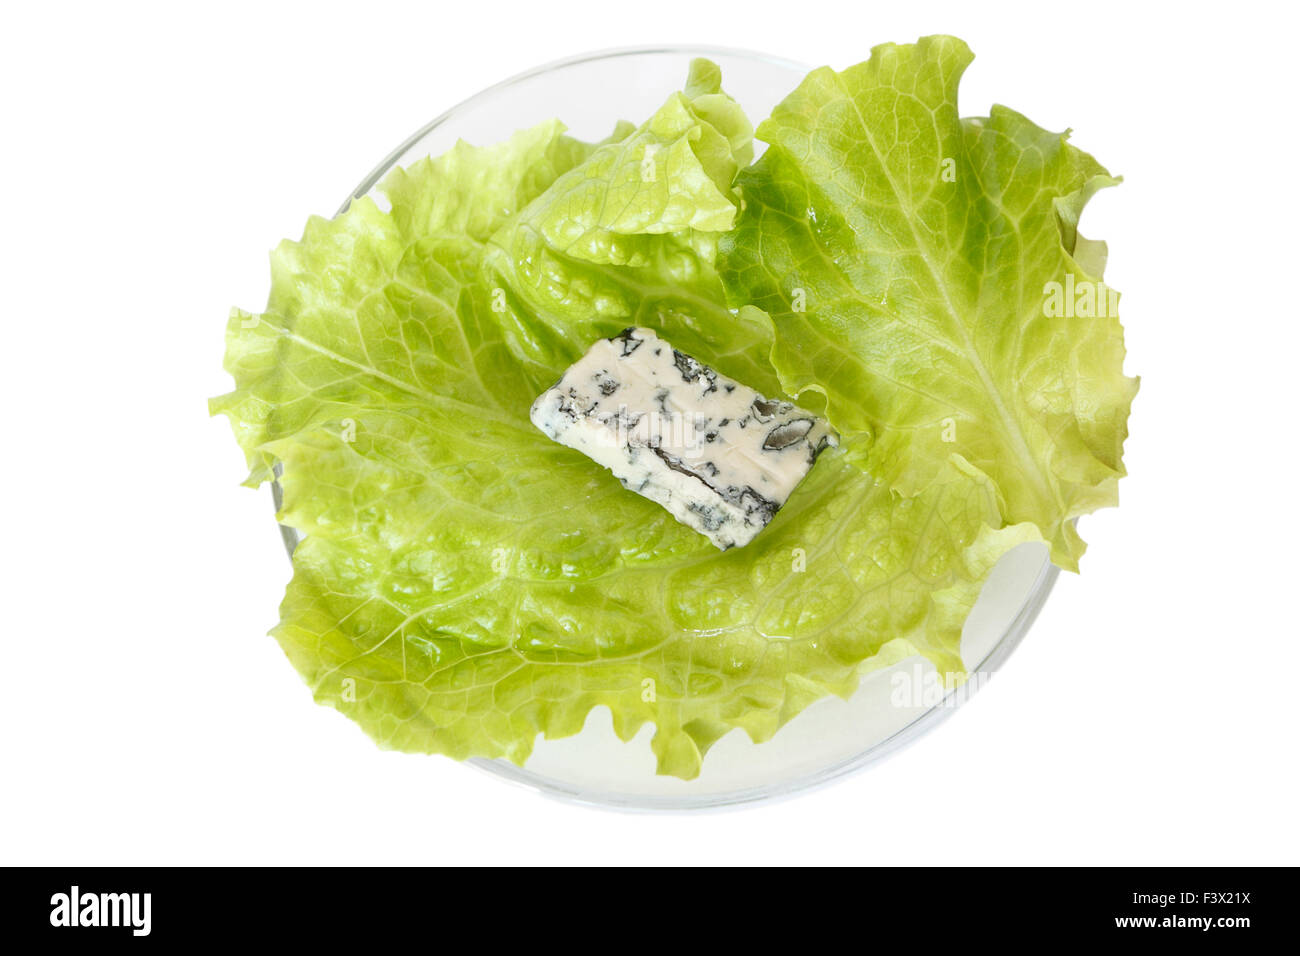 Blue cheese on leaf lettuce Stock Photo